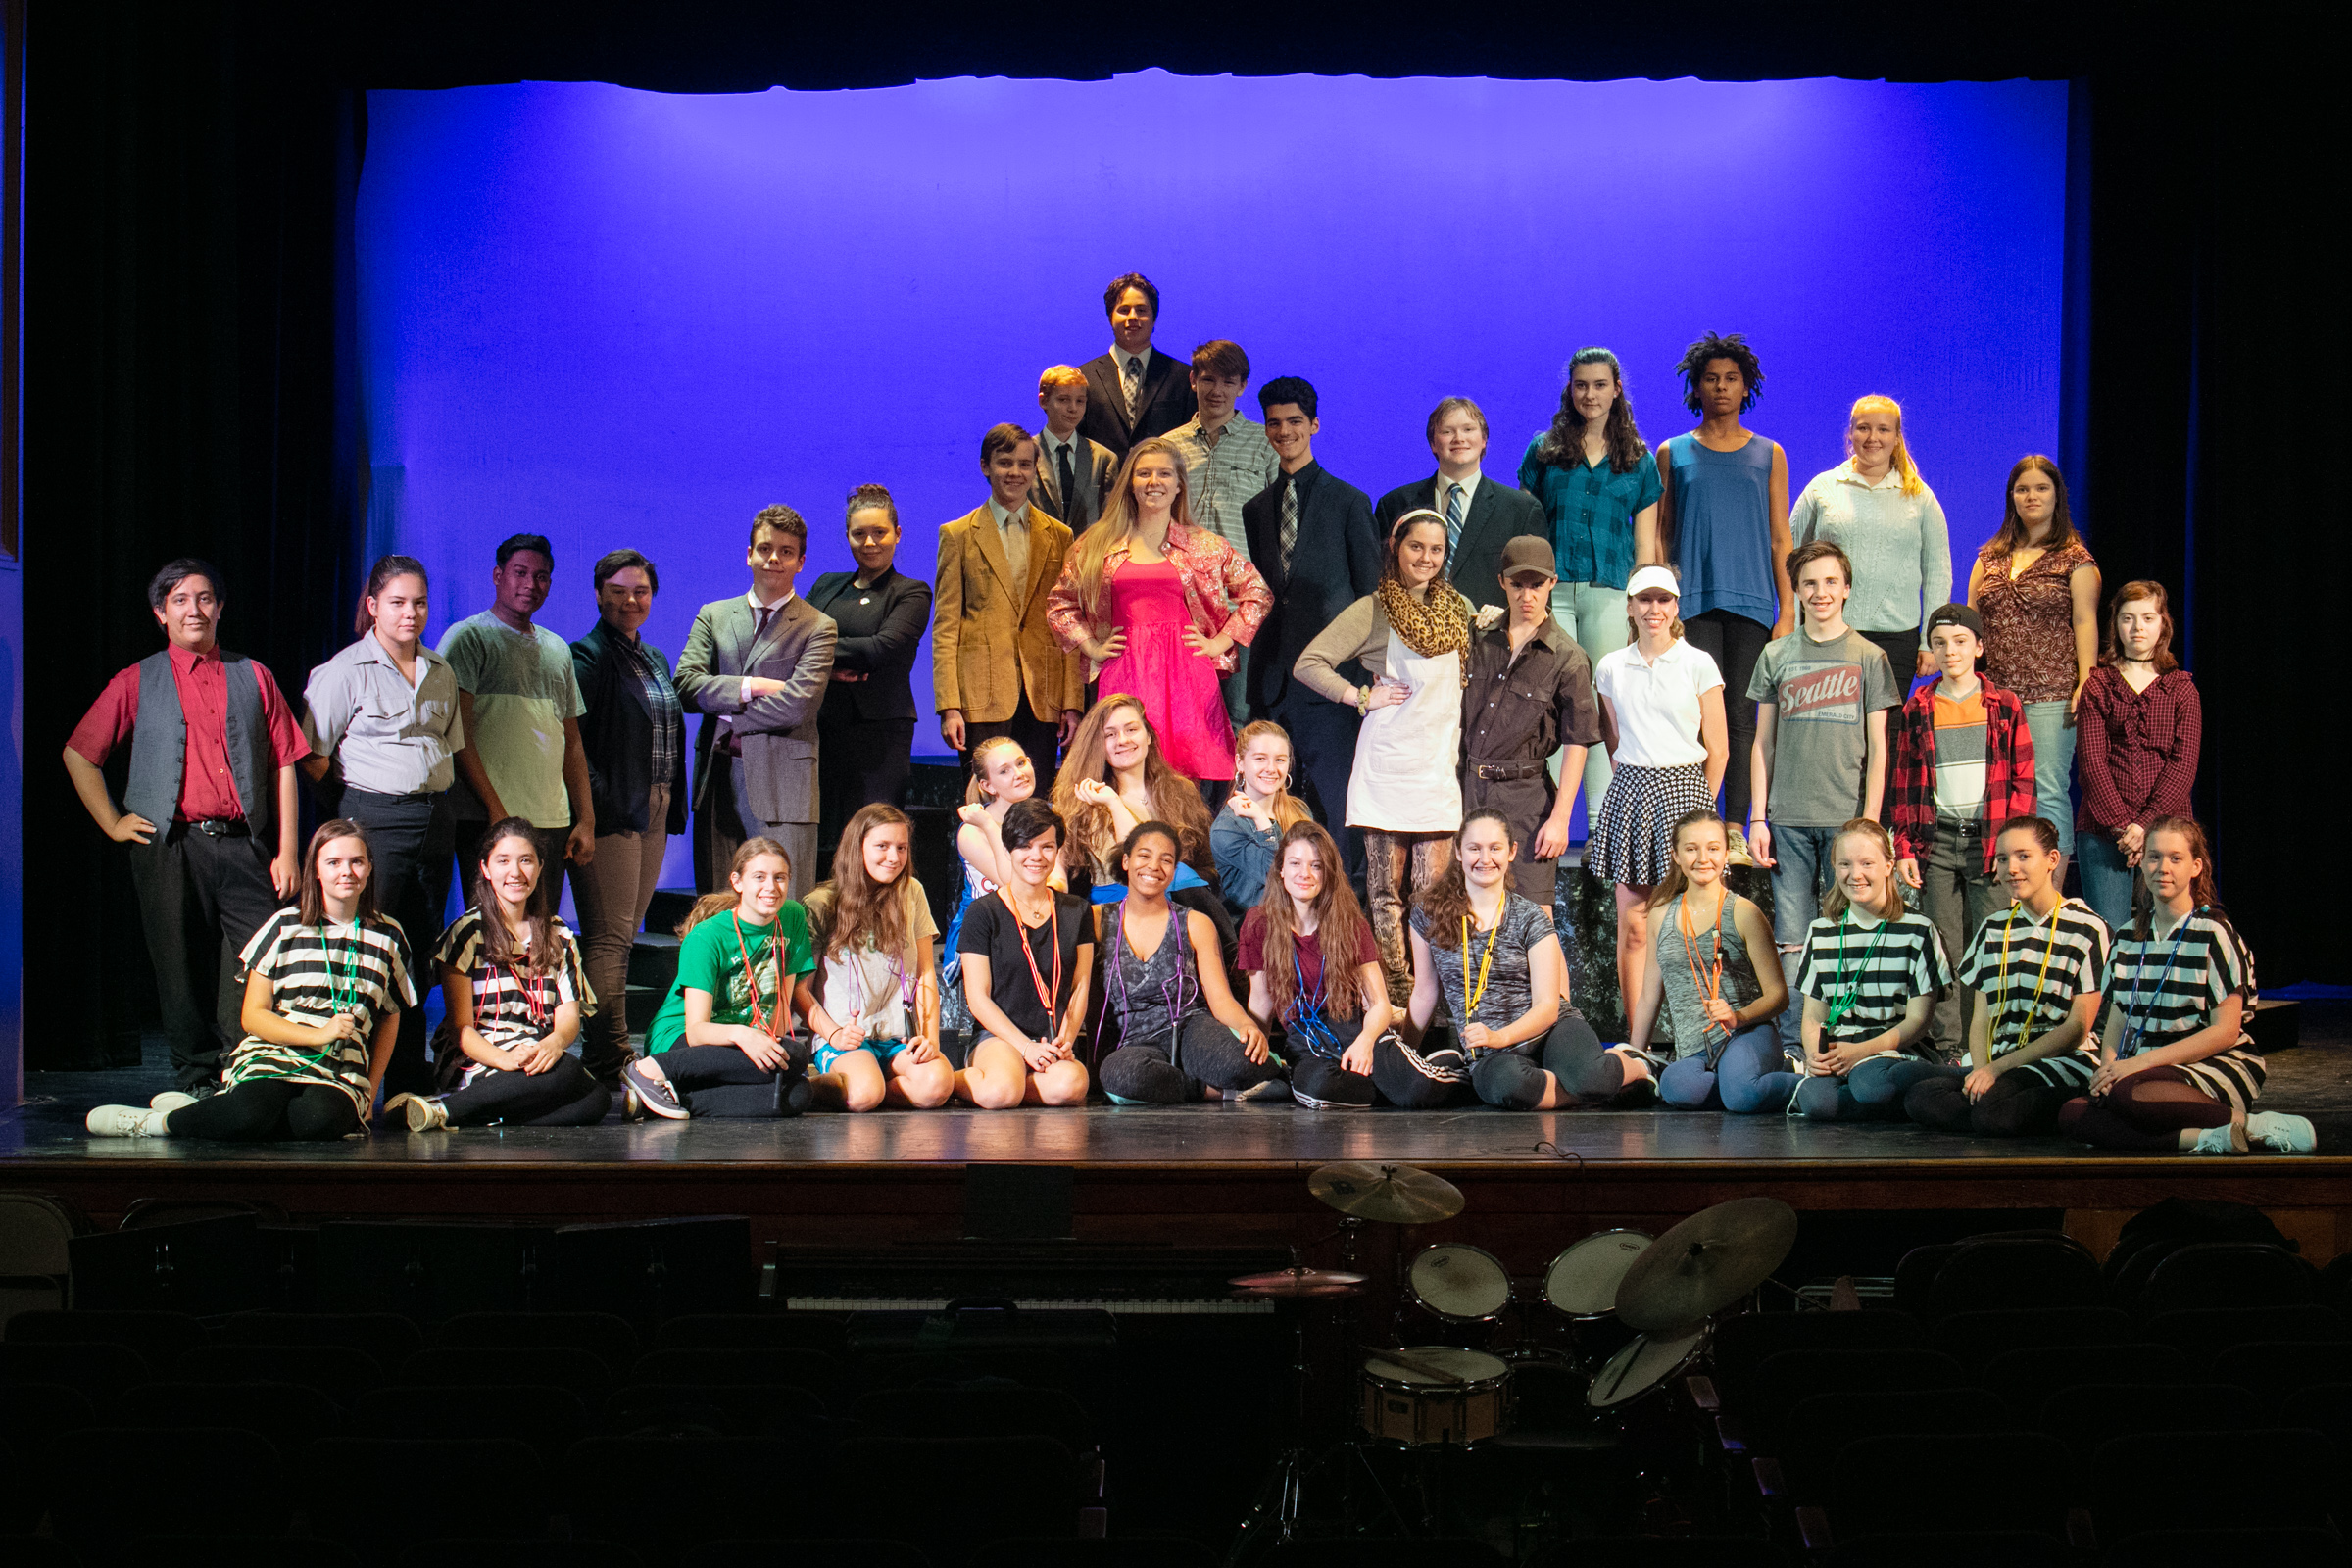 Cast of Legally Blonde